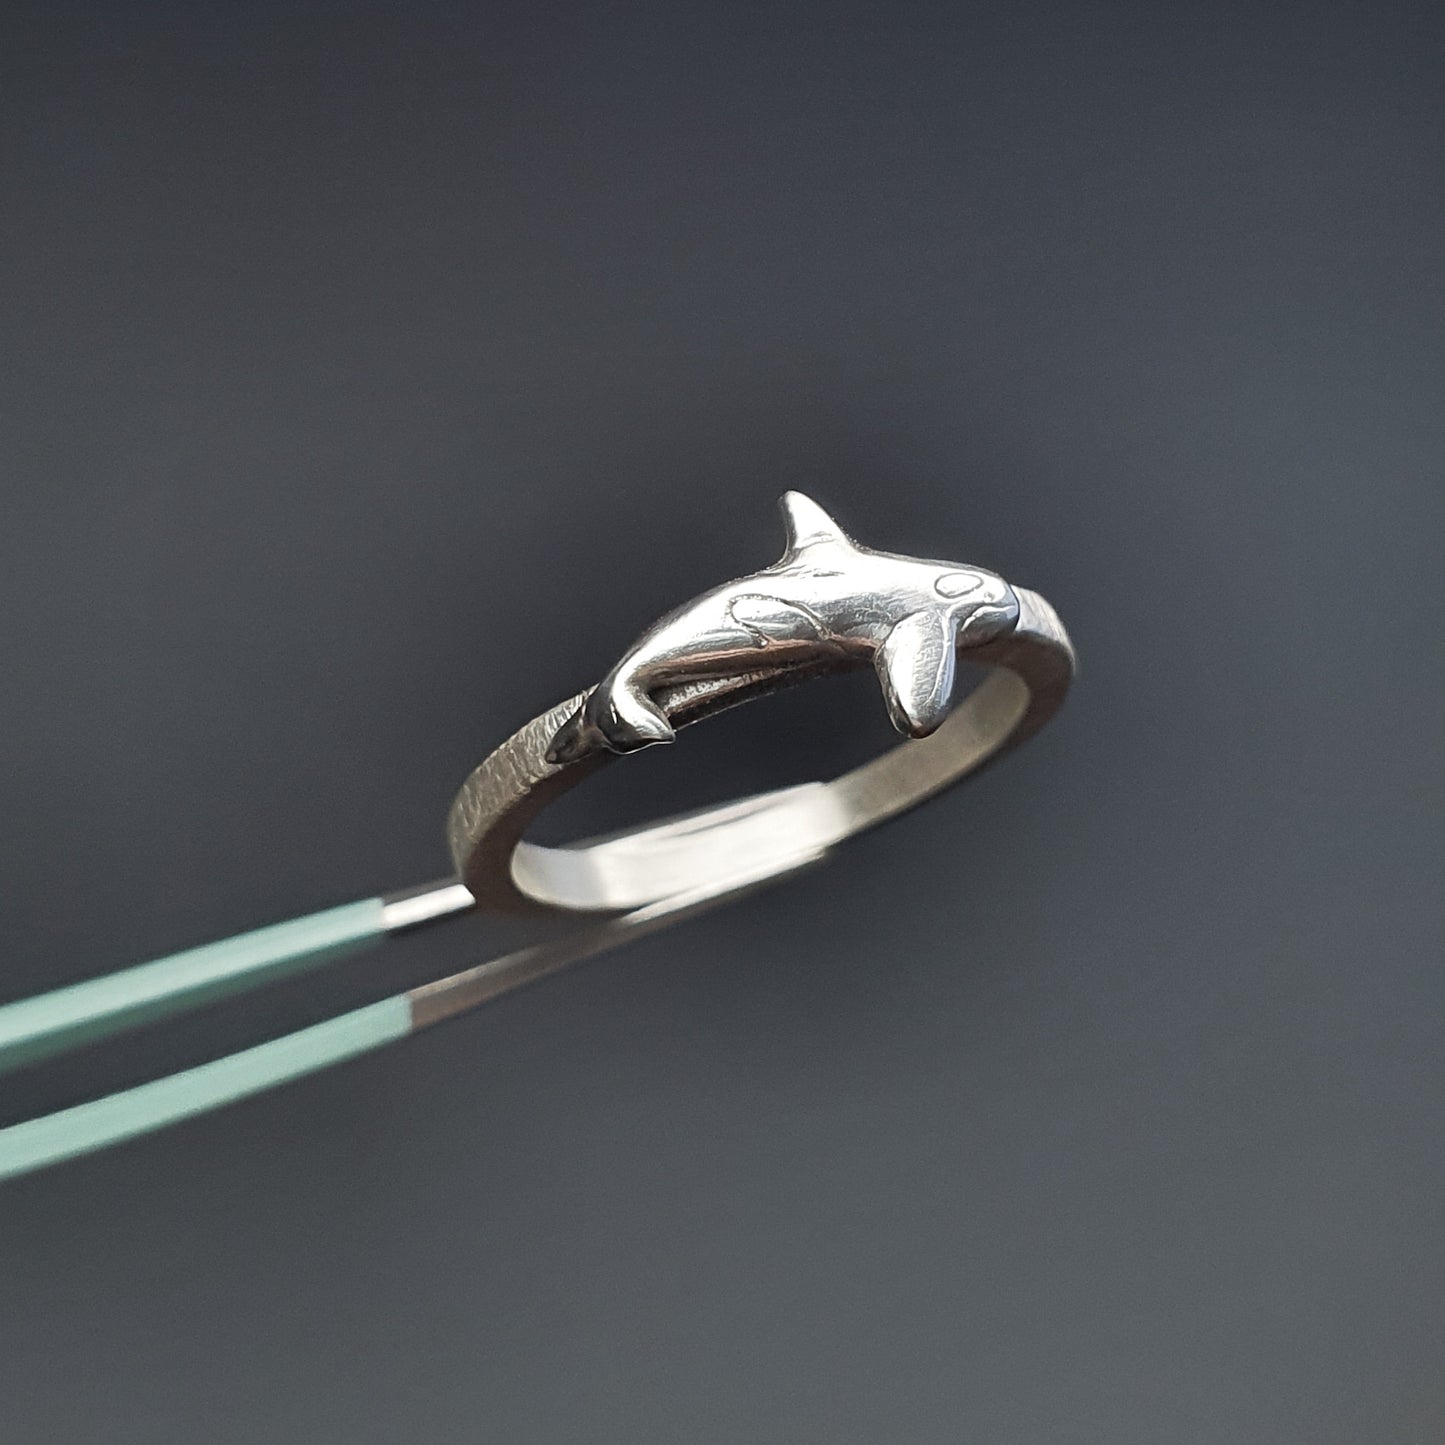 Solid silver orca whale ring